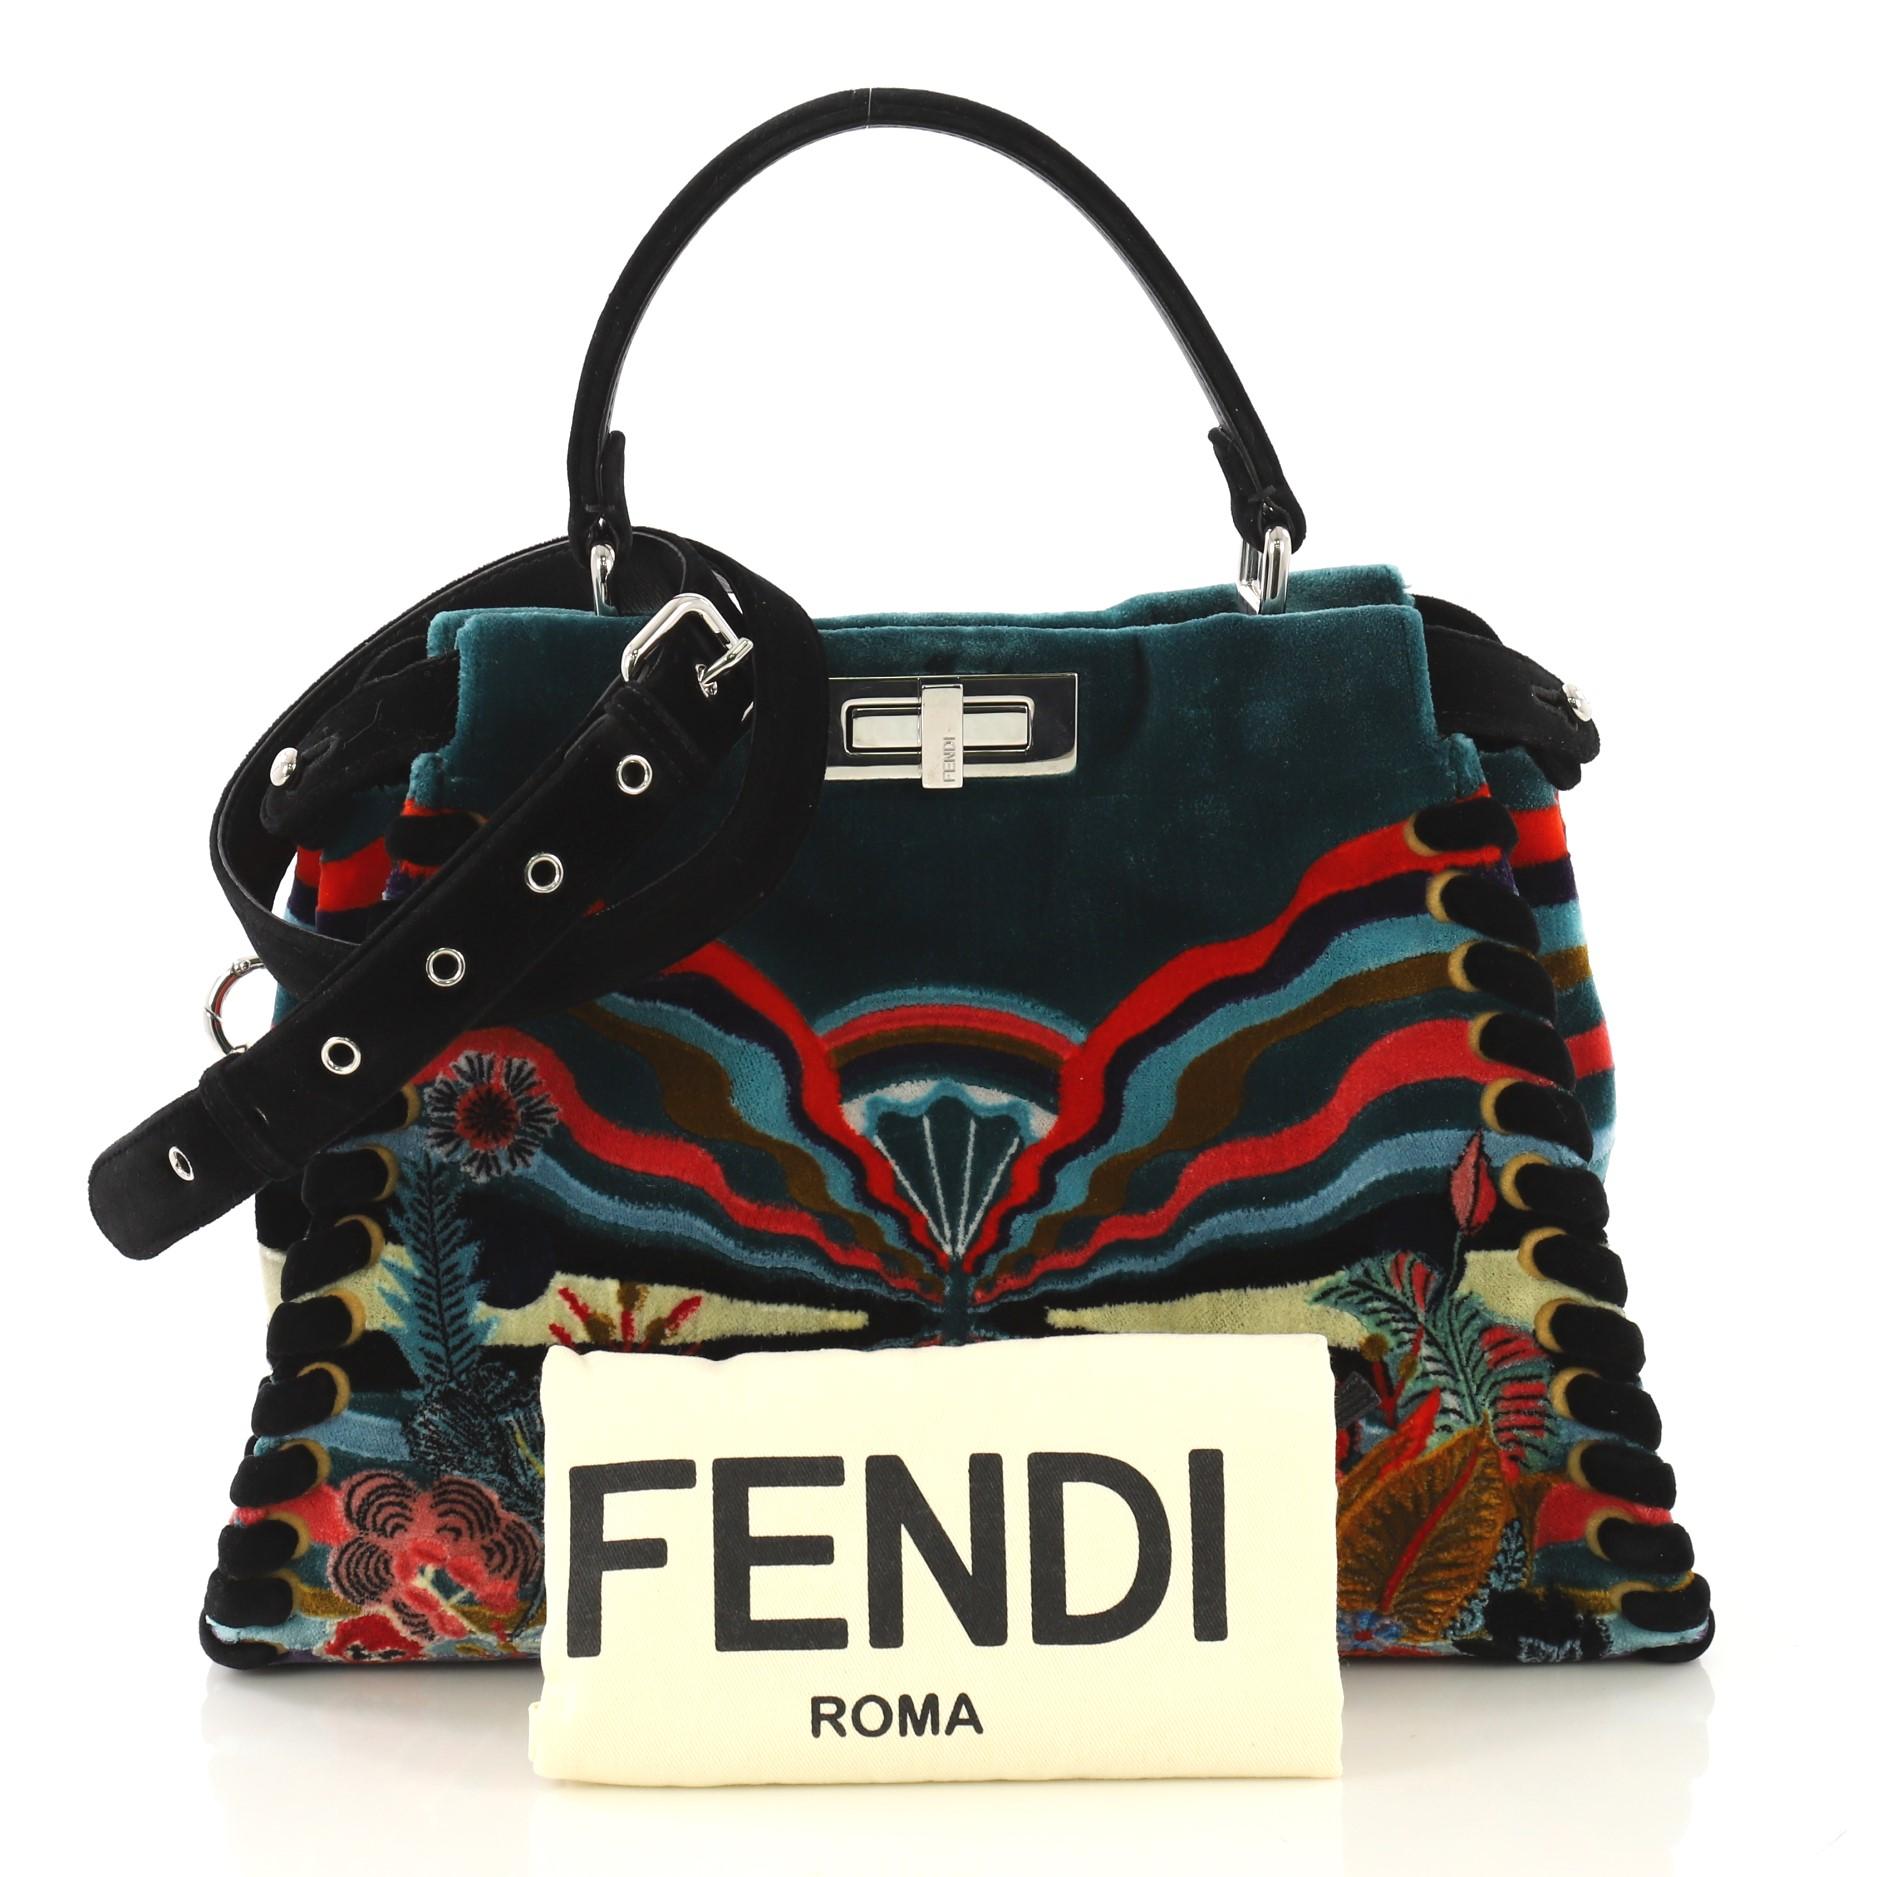 This Fendi Peekaboo Bag Embroidered Velvet Medium, crafted from green embroidered velvet, features a top frame silhouette, flat top handle, protective base studs, and silver-tone hardware. Its turn-lock and magnetic snap closures open to a black